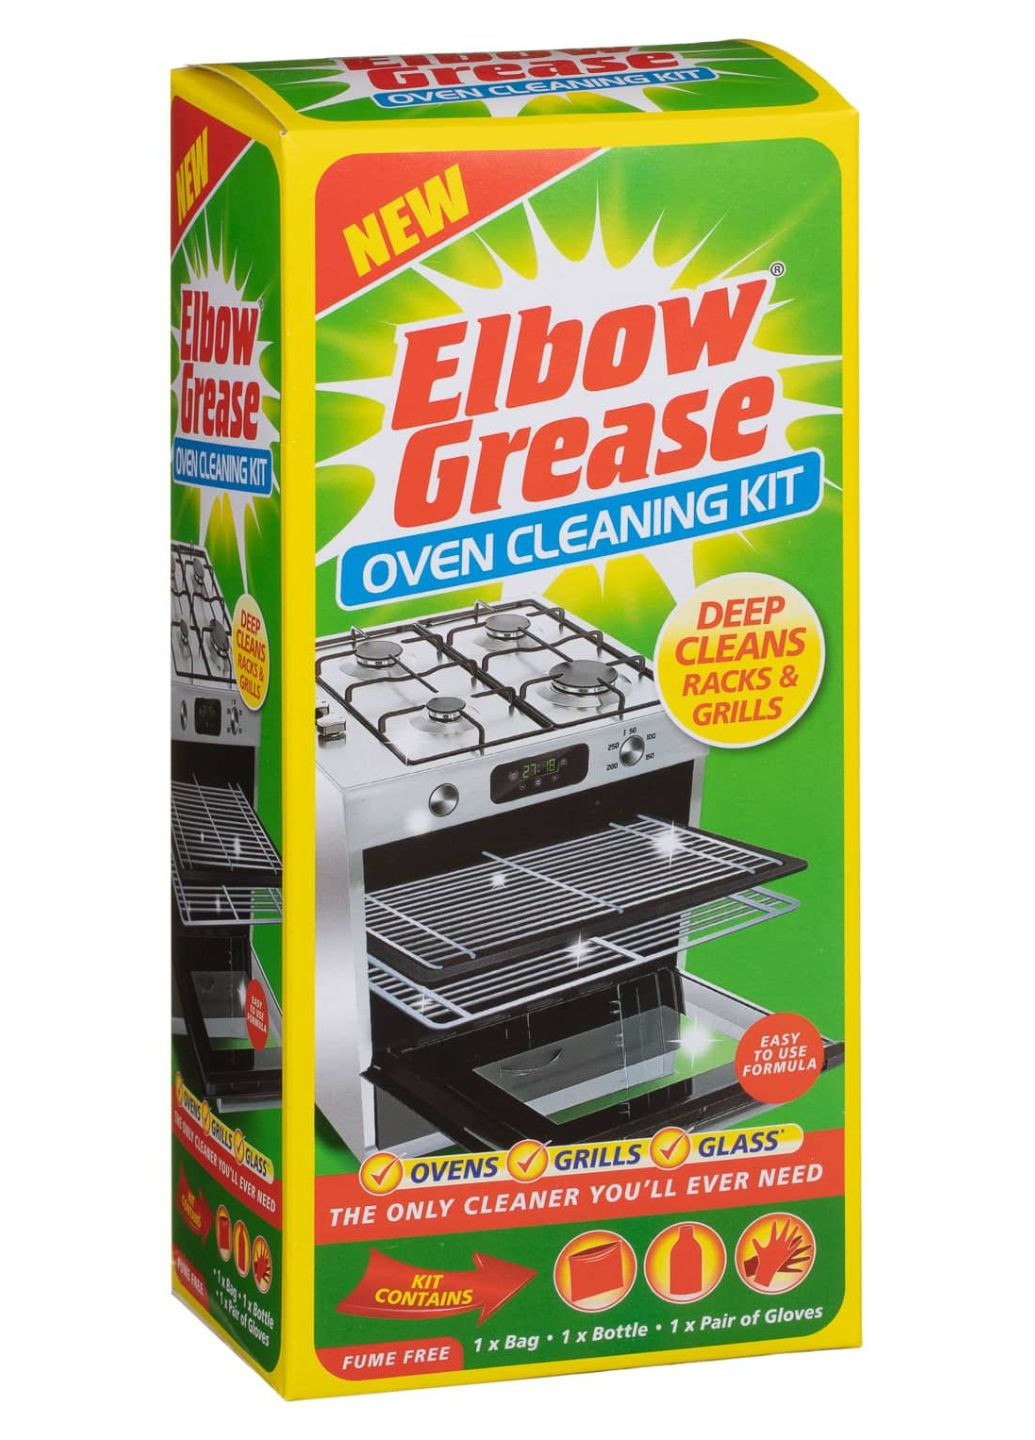 Набор для чистки духовки Oven Cleaning Kit Elbow Grease (261925471)